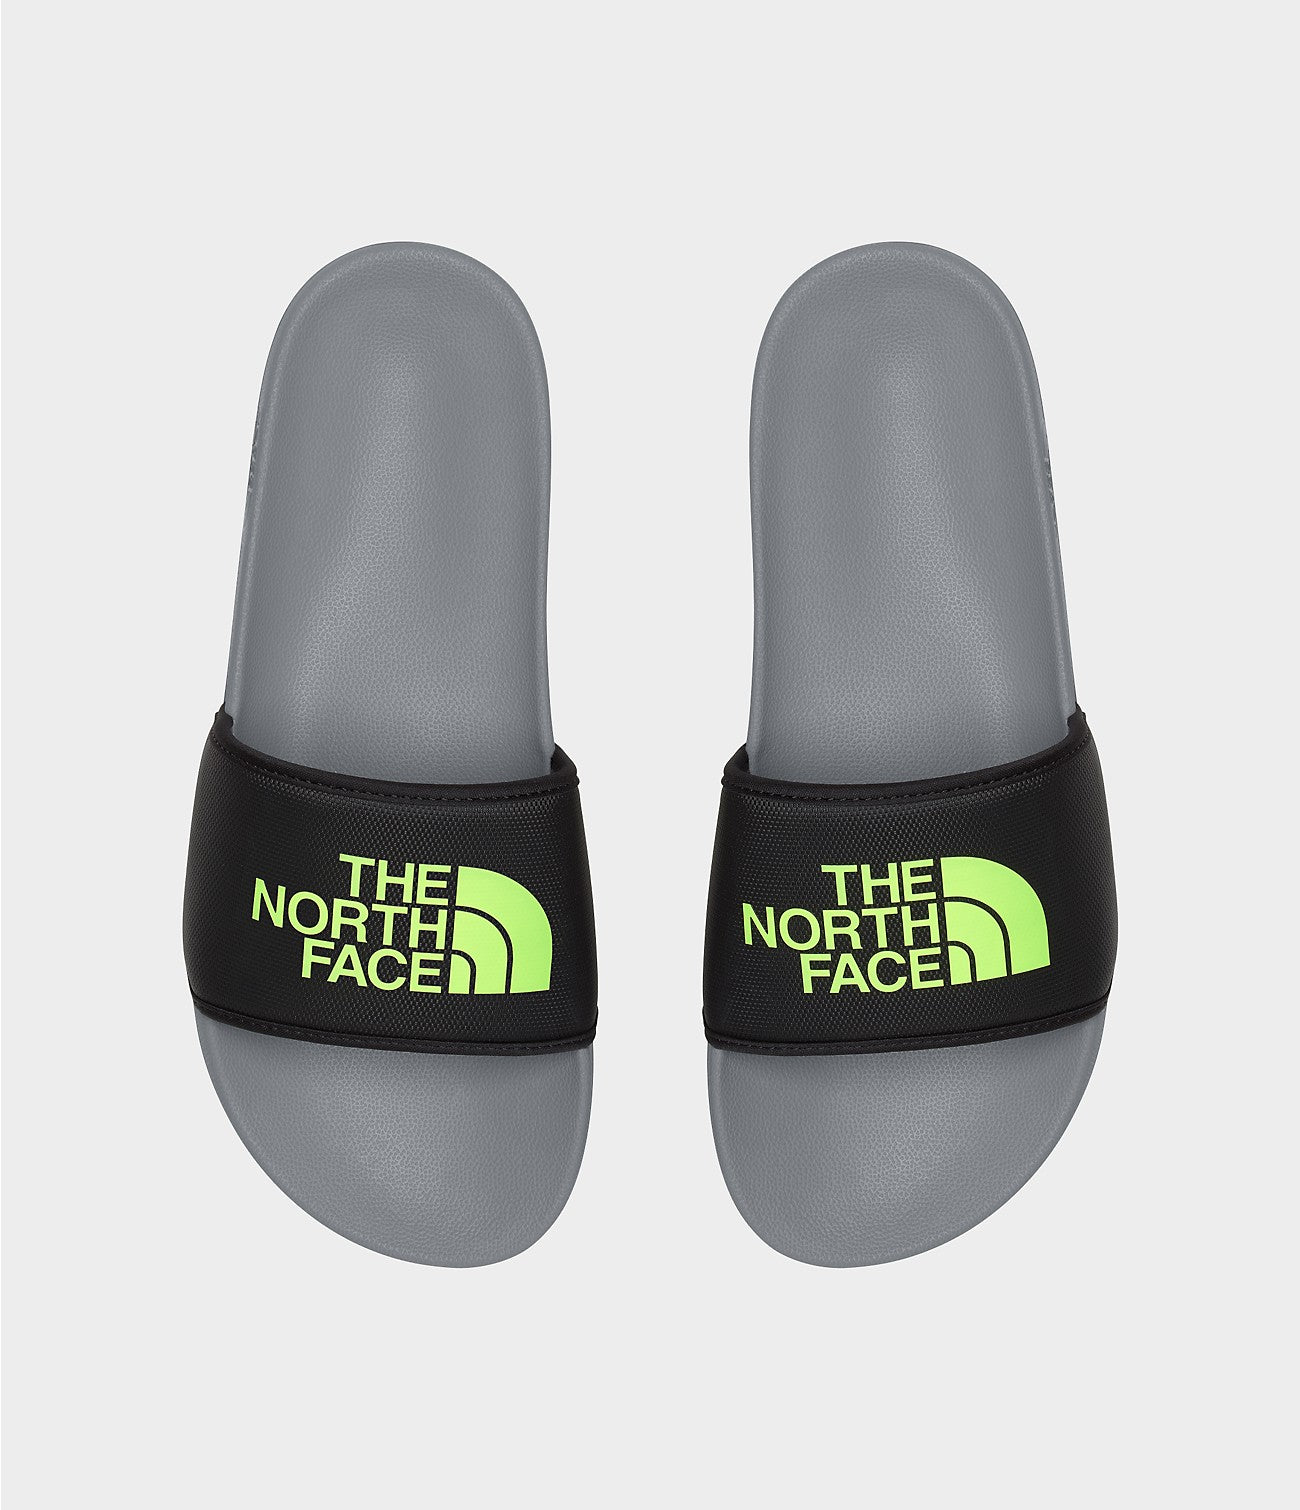 SANDALES THE NORTH FACE HOMME, BASE CAMP SLIDE III MELD GREY NF0A4T2R MAHEU GO SPORT